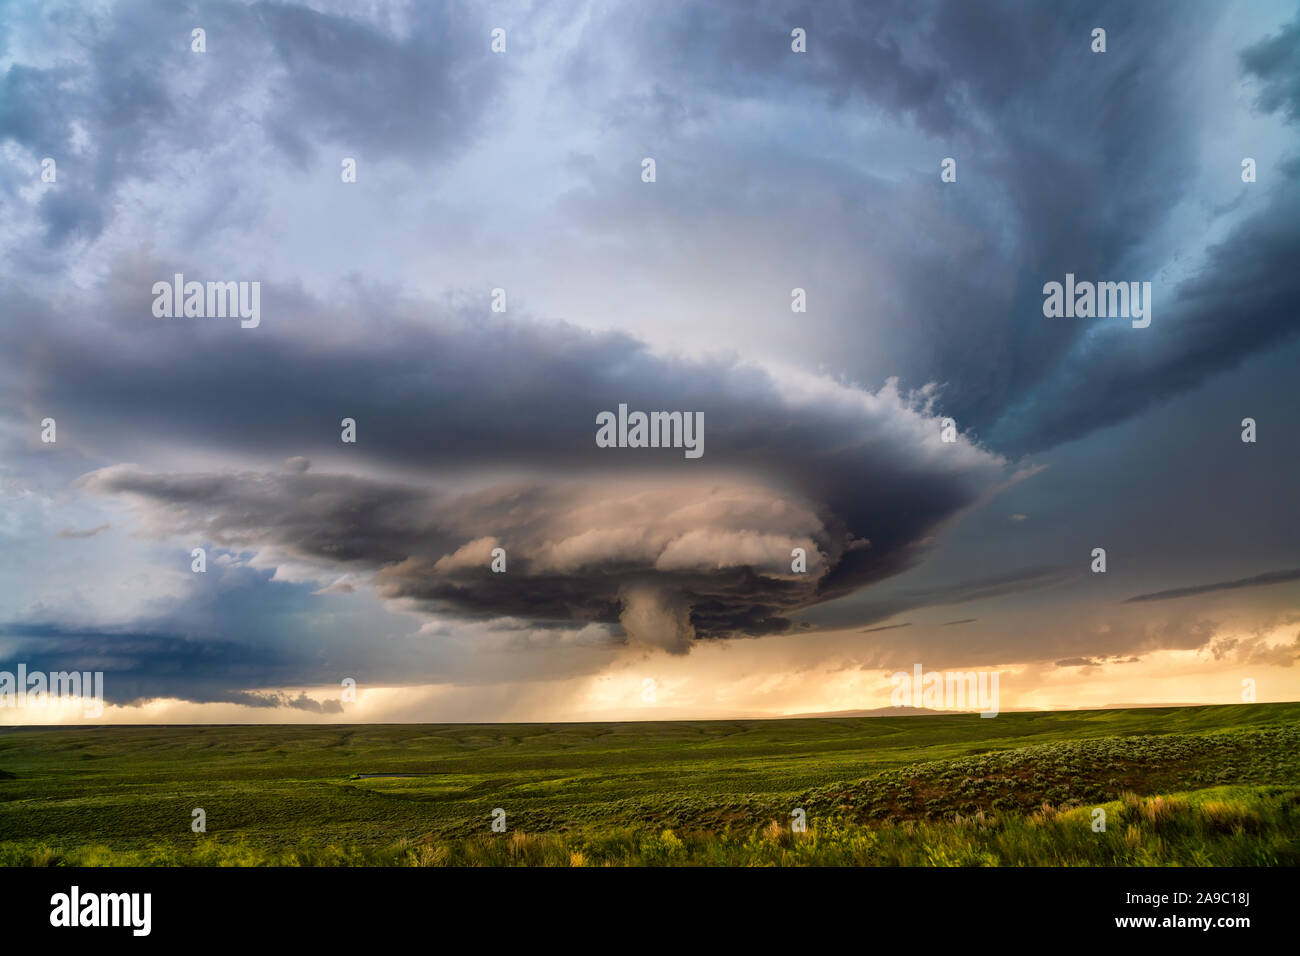 Supercell thunderstorm spins over a field during a severe weather outbreak near Roundup, Montana Stock Photo